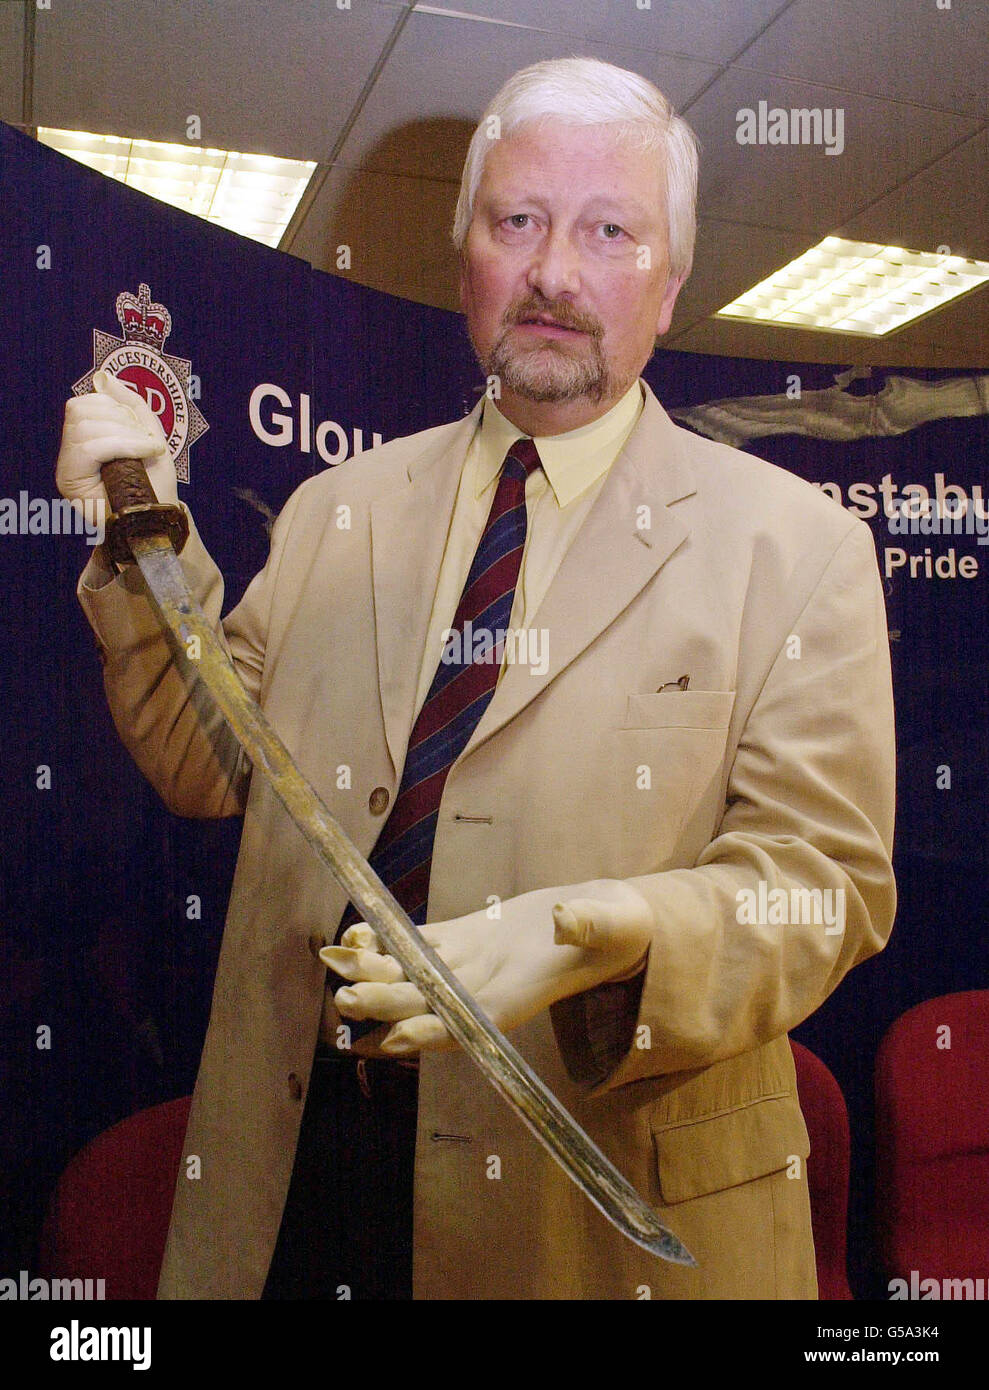 Cheltenham Lib Dem MP Nigel Jones, who was nearly killed in a Samurai sword attack, holds the weapon which nearly claimed his life and killed his best friend. *...His attacker, Robert Ashman, 50, of Lansdown Place, Cheltenham, was proved to be behind the frenzied attack in which Mr Jones was injured and his aide Andrew Pennington killed. The assault took place during a surgery at the Lib Dem offices in Cheltenham in January last year. Gloucestershire County Cllr Mr Pennington, 39, was left with nine deep stab wounds, six of which passed all the way through his body. Jones escaped with severe Stock Photo